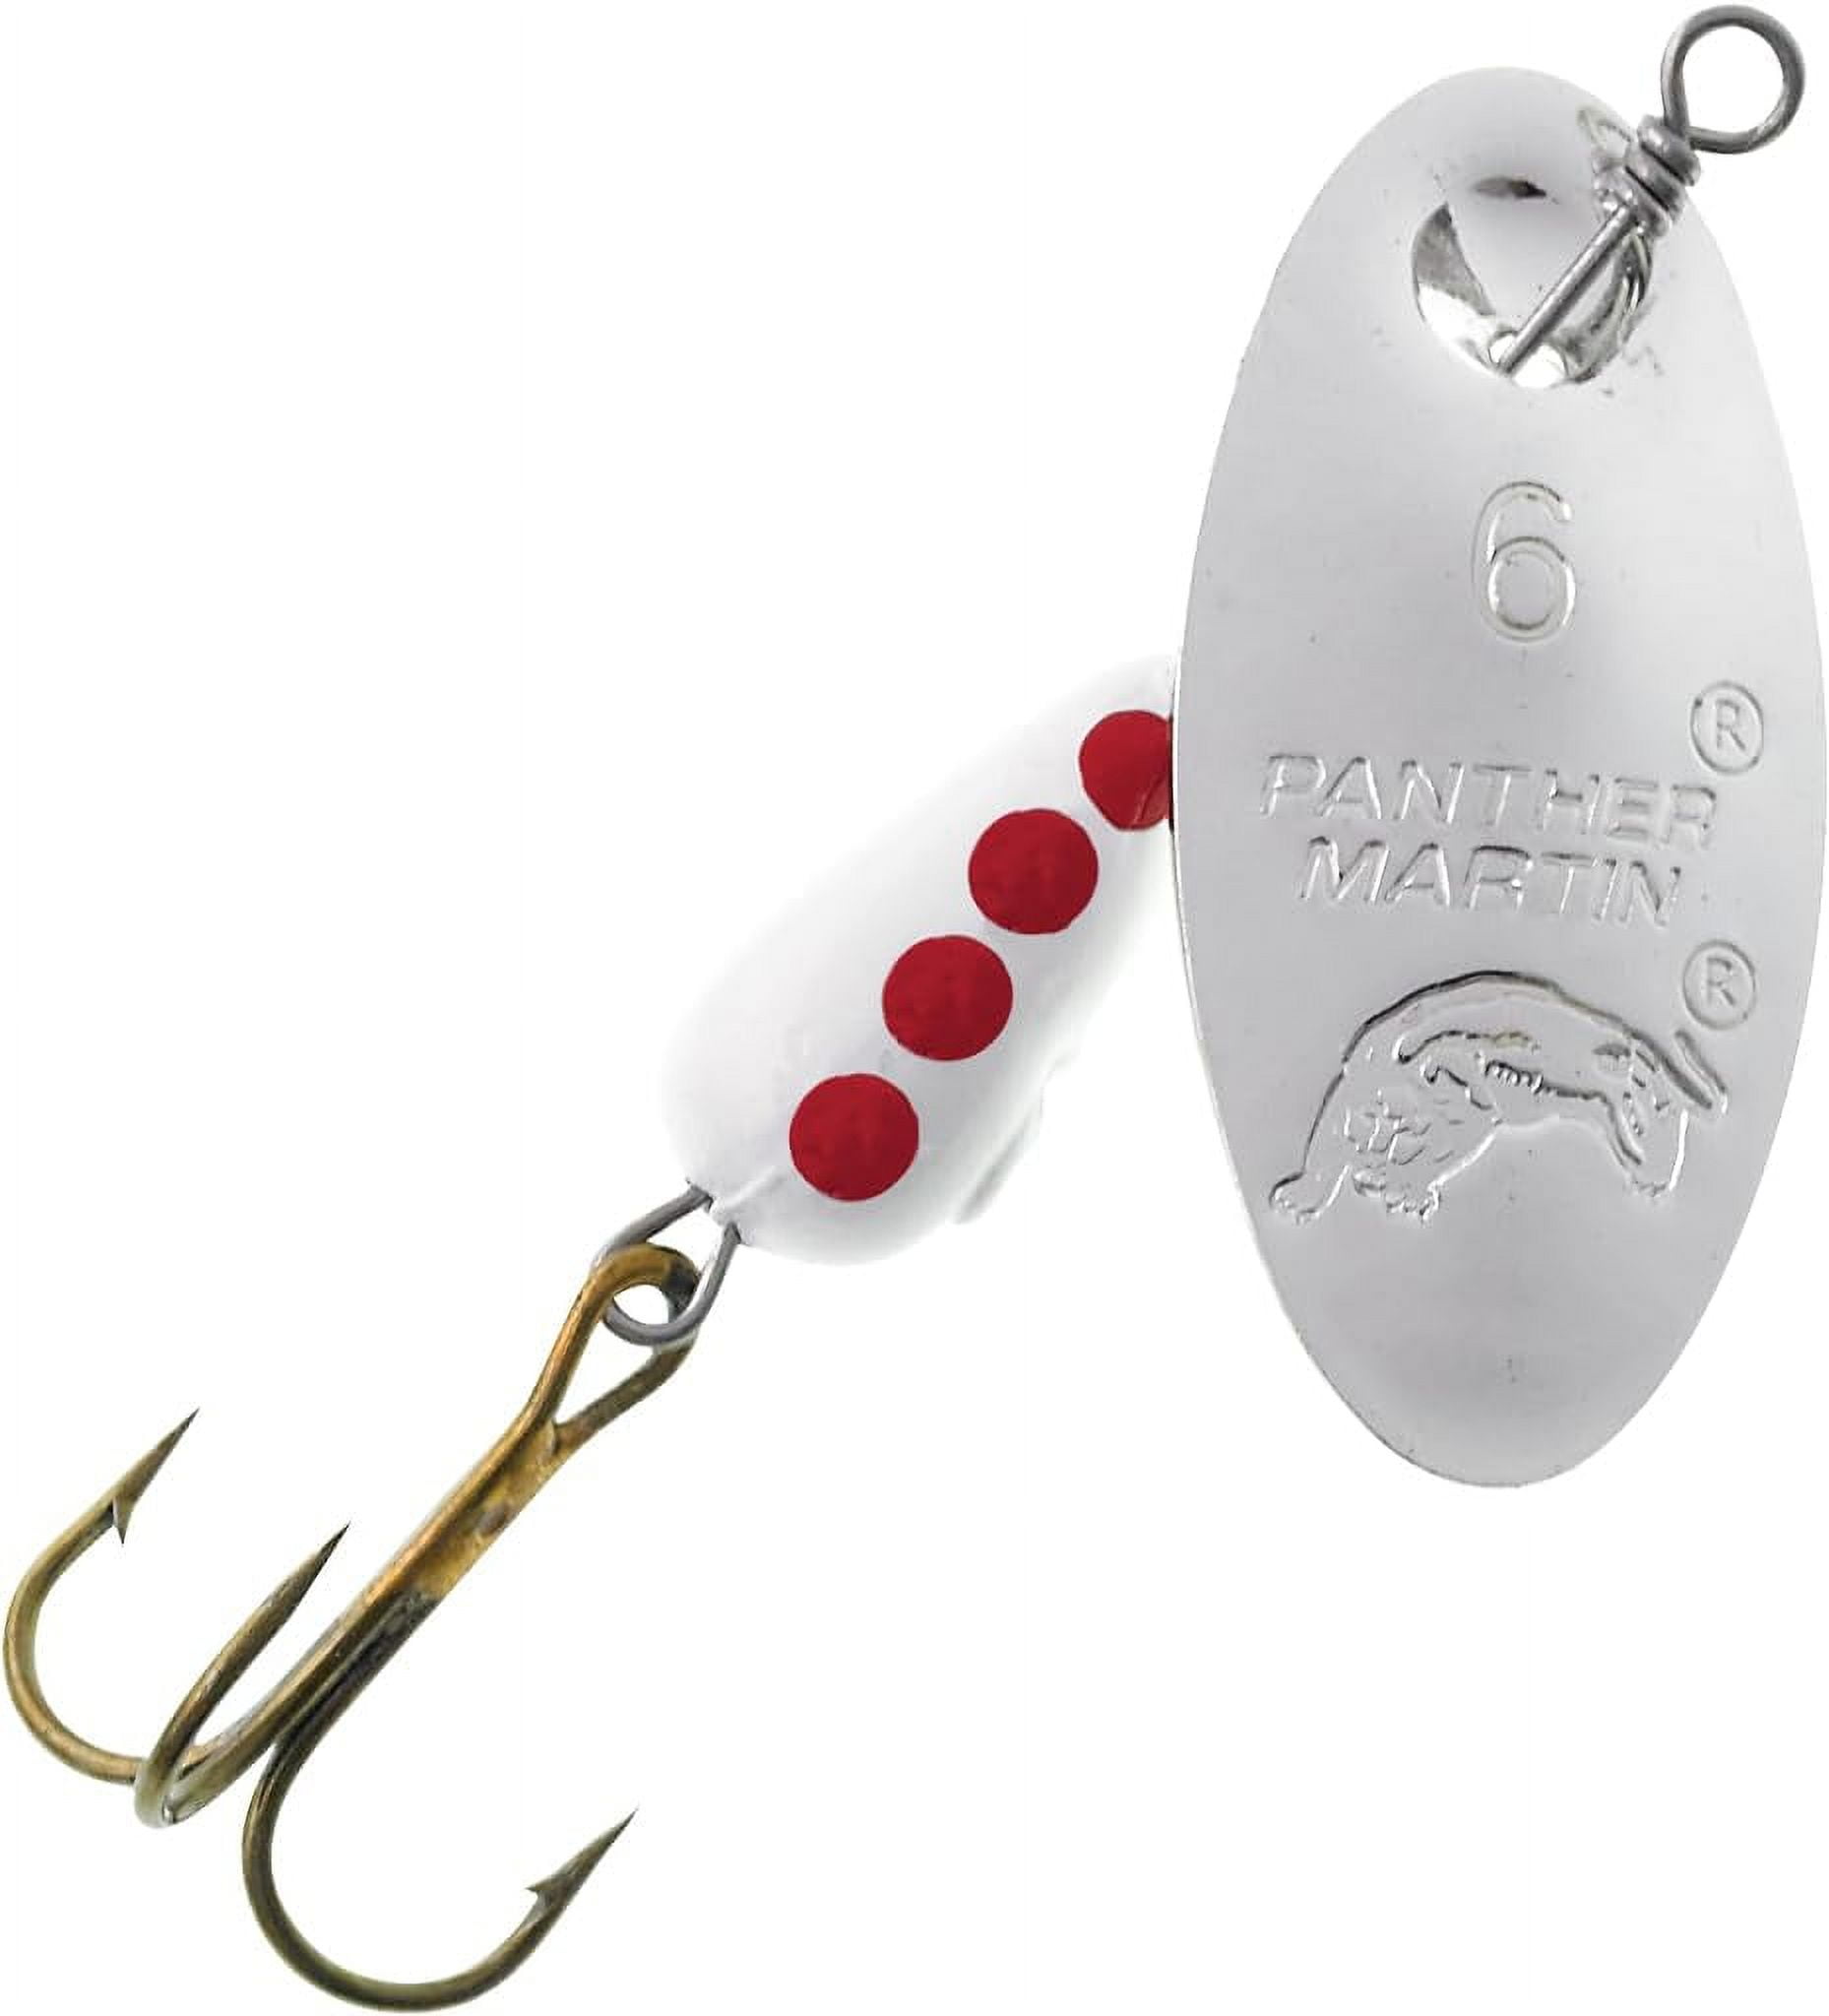 Panther Martin PMR_15_S Classic Regular Teardrop Spinners Fishing Lure -  Silver - 15 (1/2 oz) 